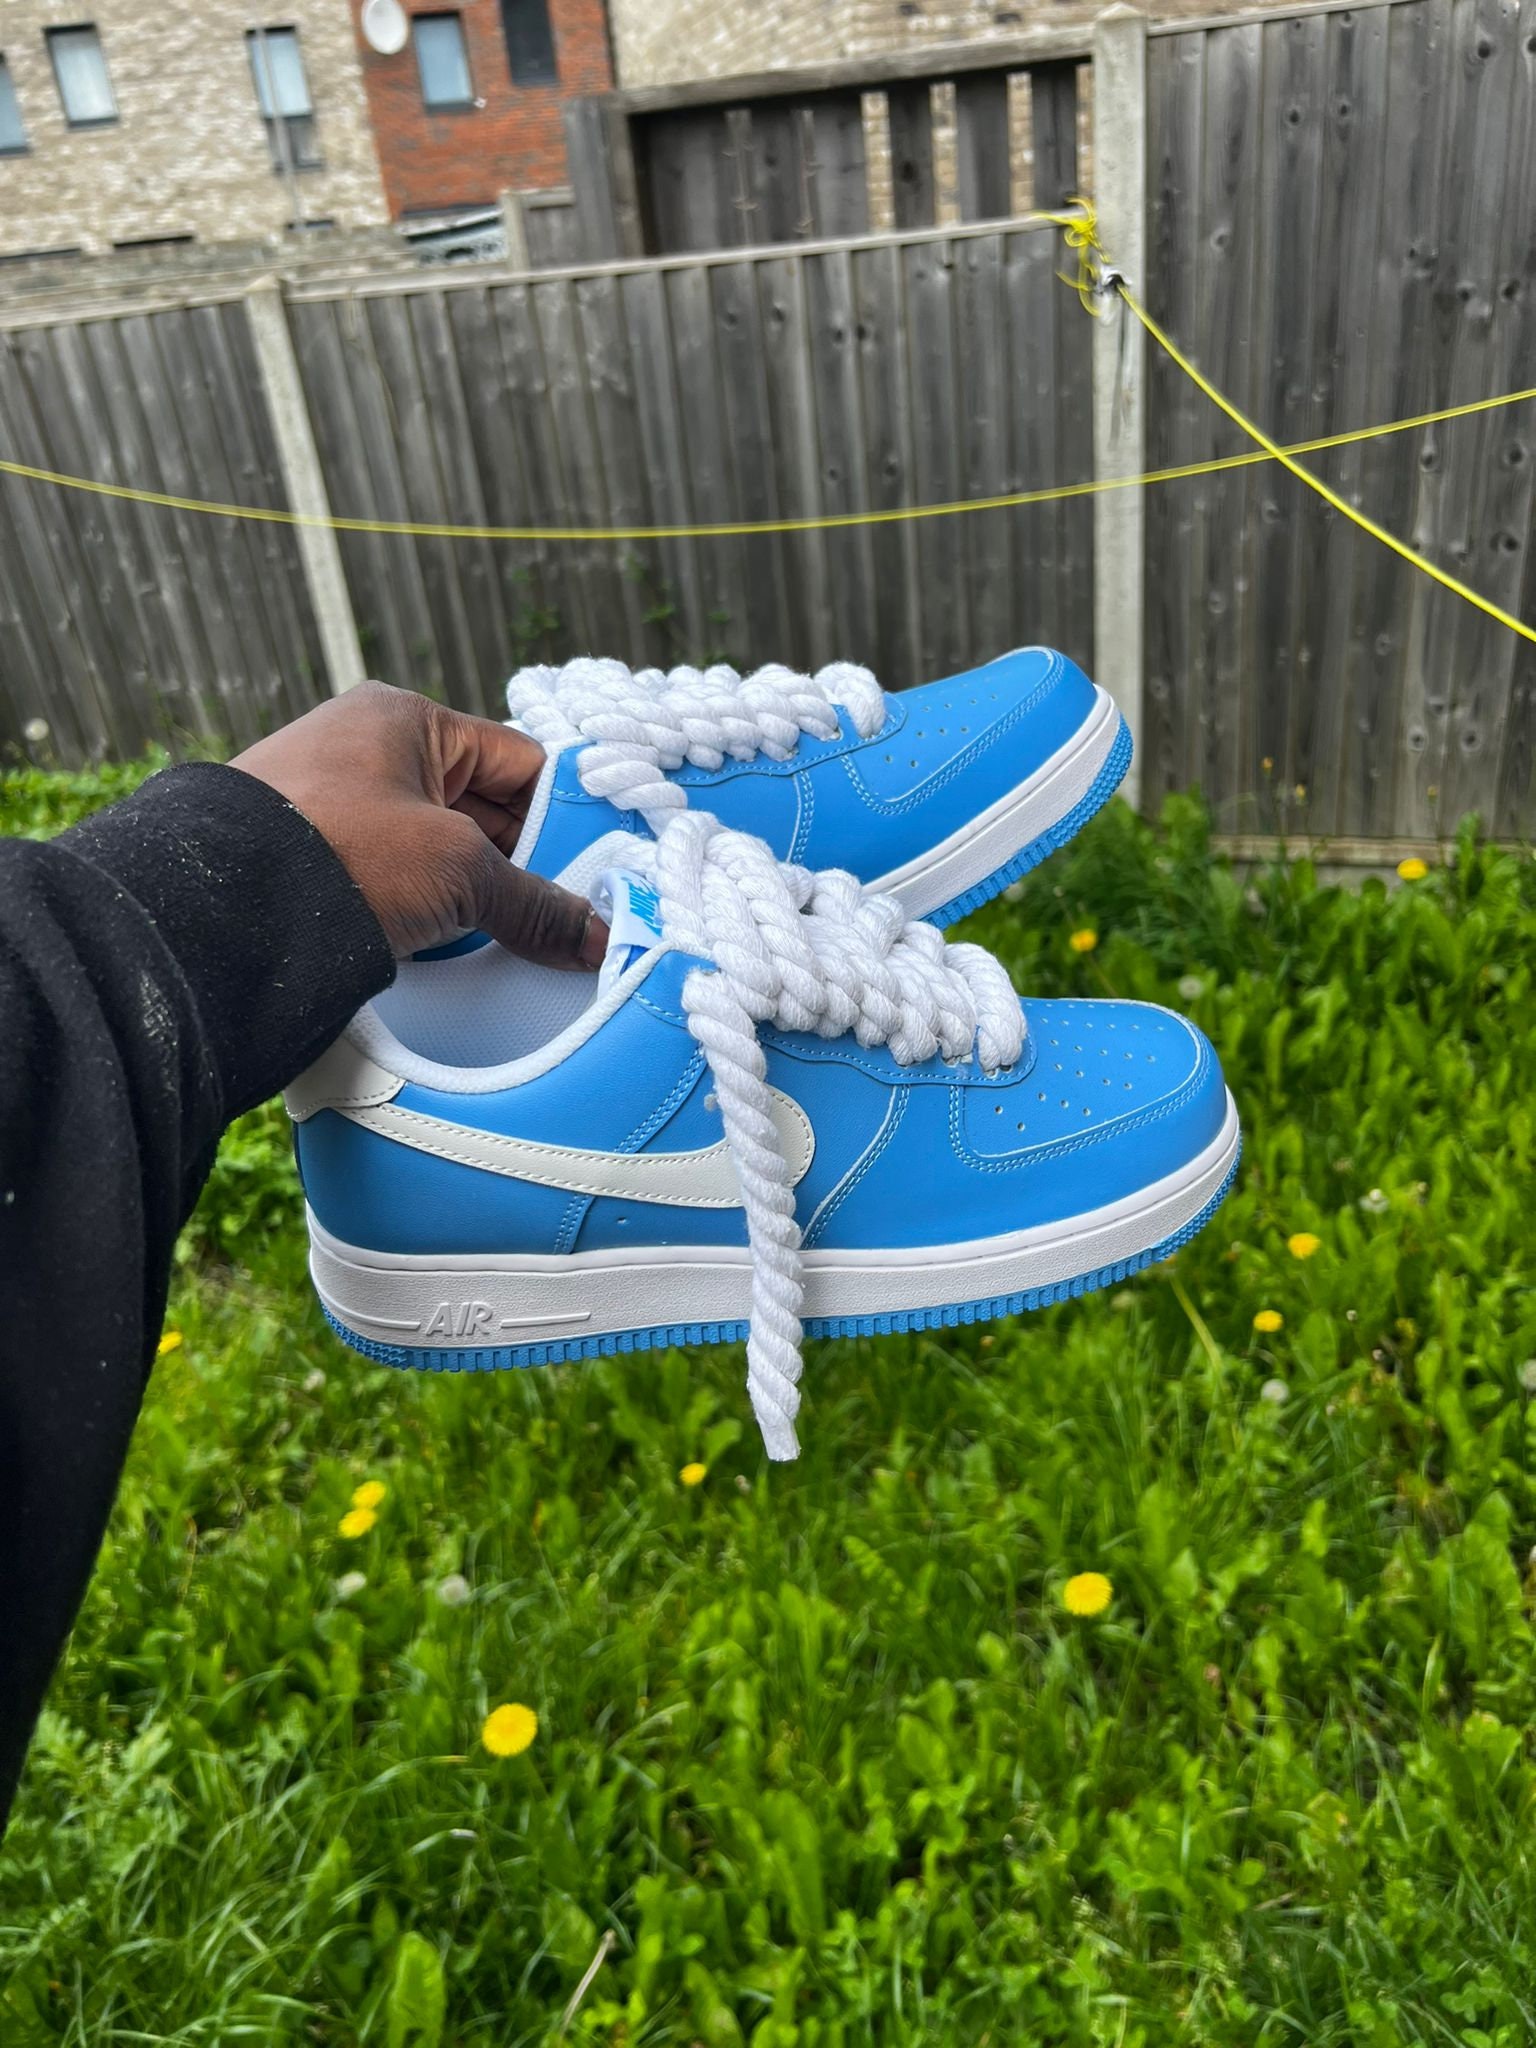 Nike Air Force 1 Low Off-White MCA University Blue Size 14 : r